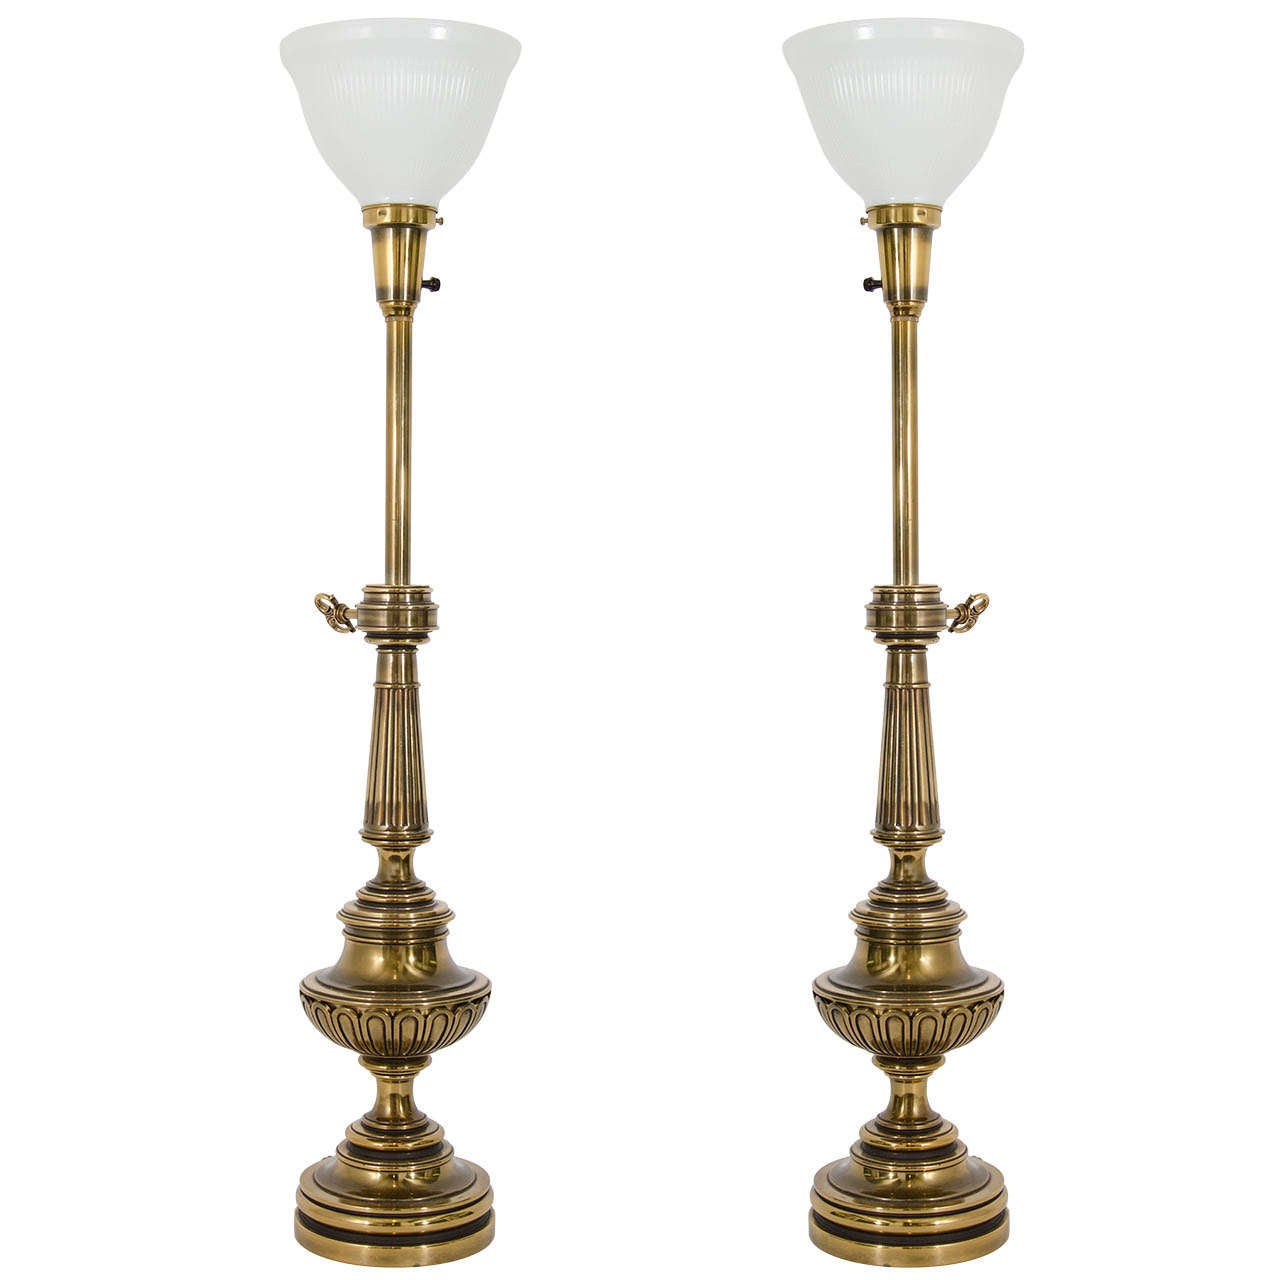 A Mid Century Pair of Torchiere Table Lamps by Stiffel